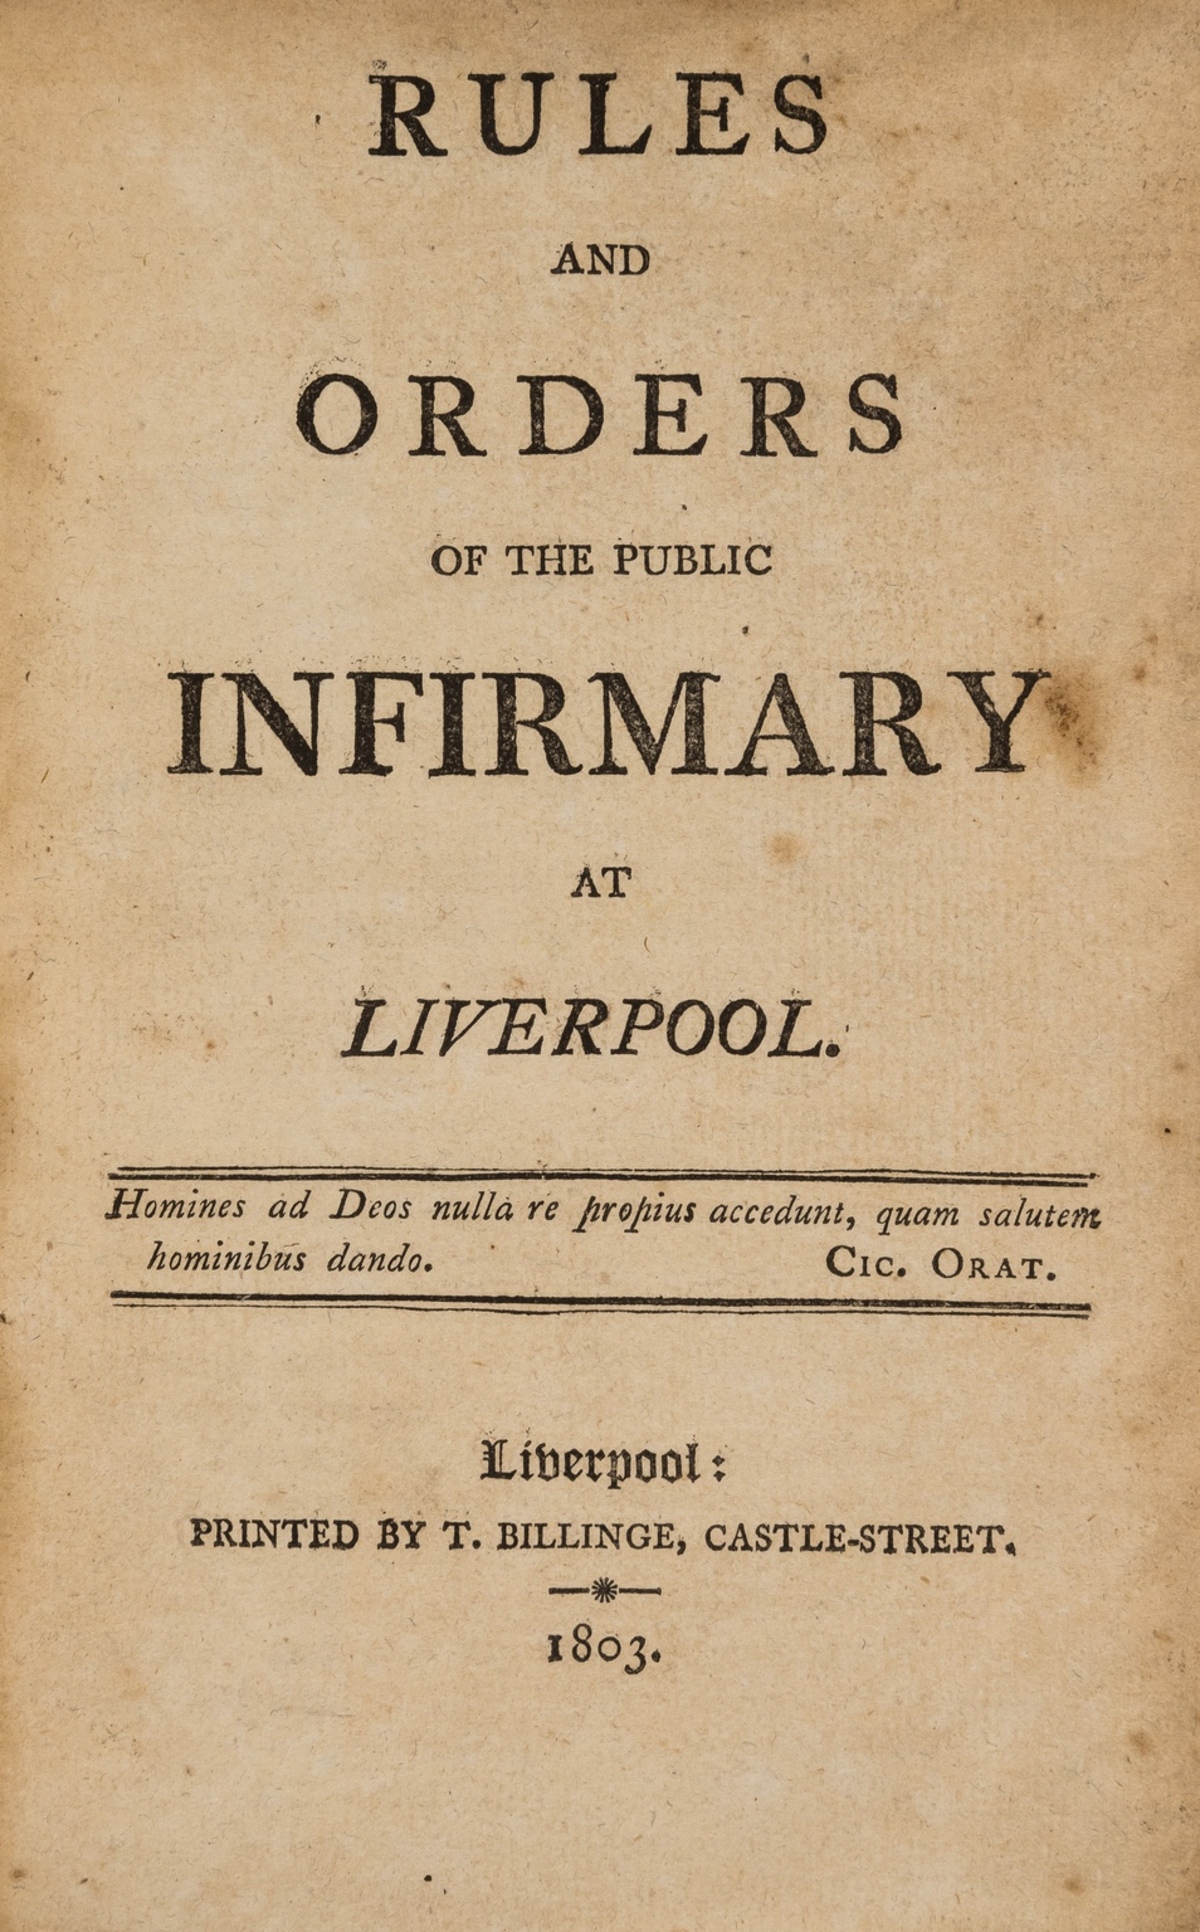 Health of the Poor.- Rules and Orders of the Public Infirmary at Liverpool, Liverpool, T.Billinge, …